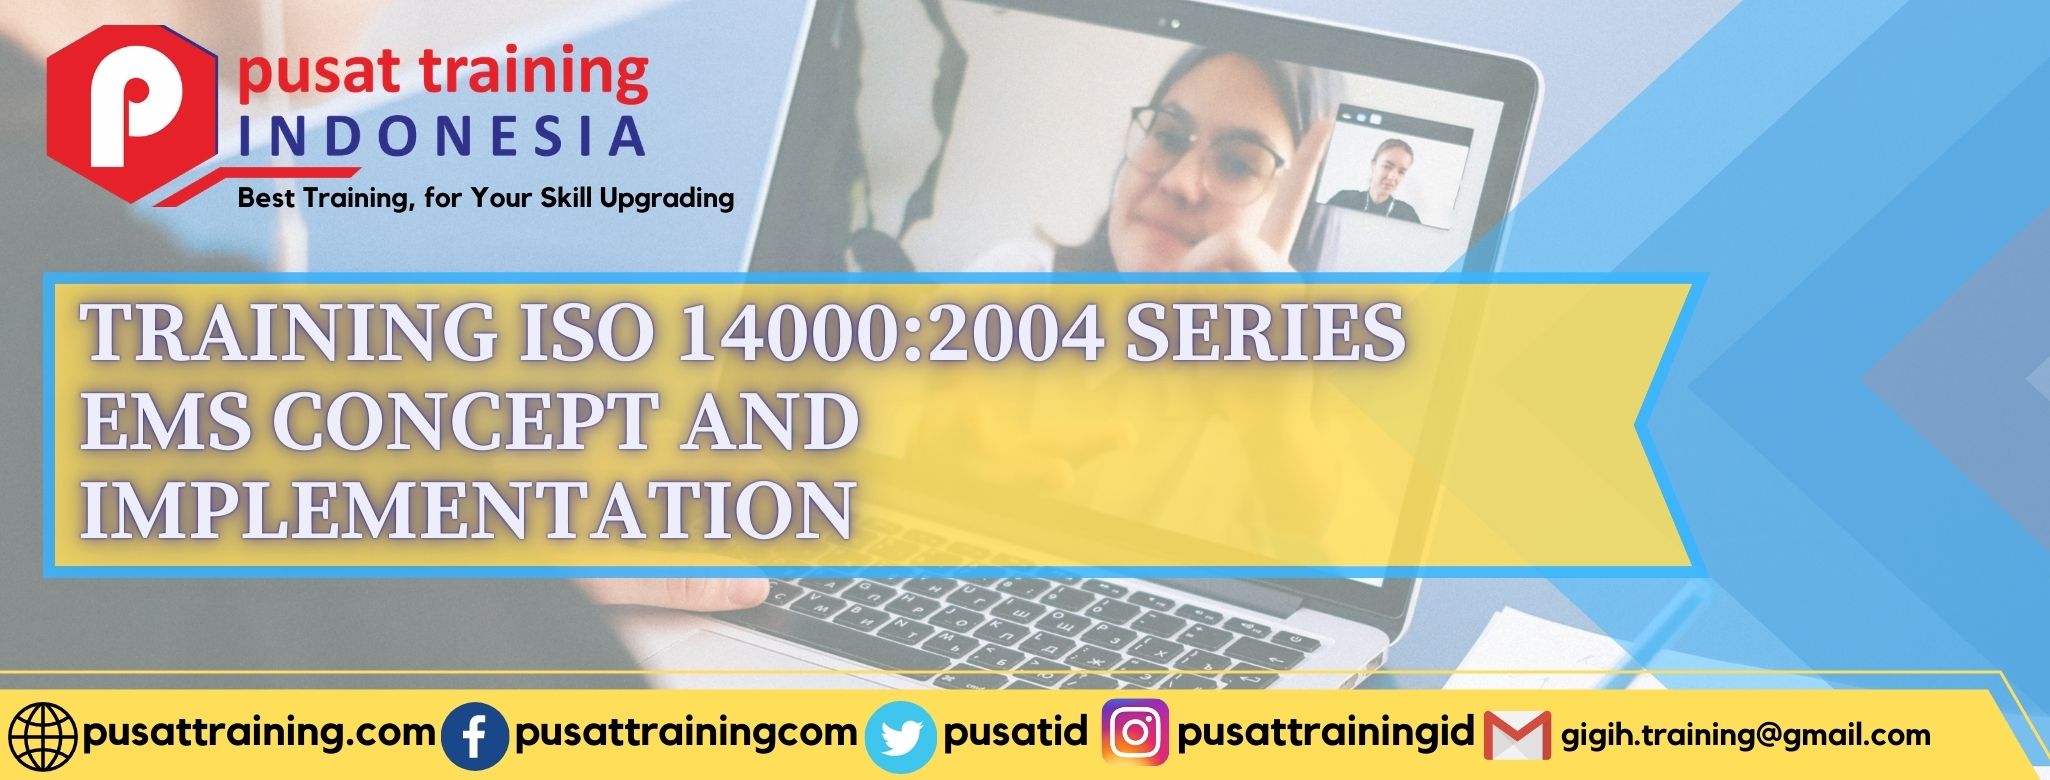 TRAINING ISO 140002004 SERIES EMS CONCEPT AND IMPLEMENTATION